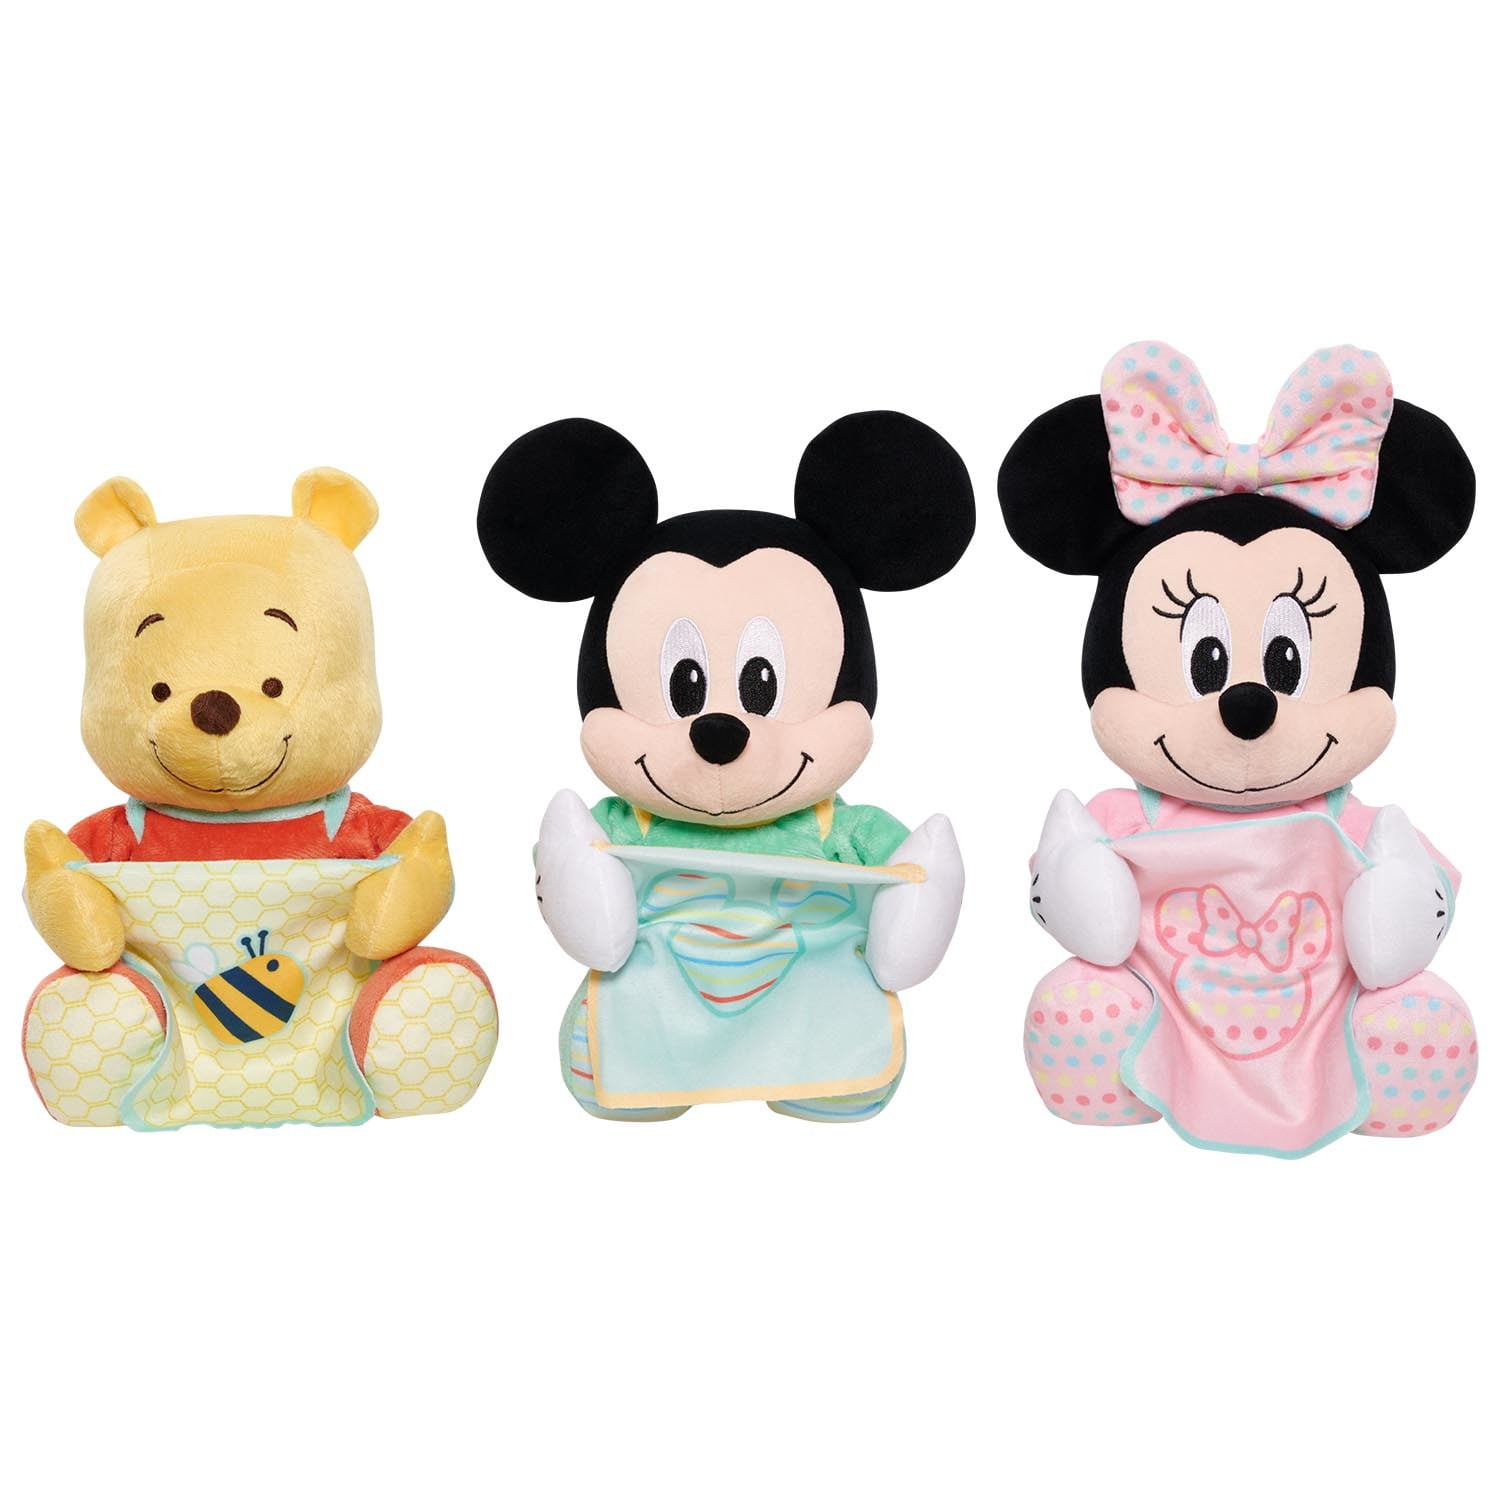 Disney Baby 11-inch Hide-and-Seek Mickey Mouse Interactive Plush, Pretend  Play, Kids Toys for Ages 09 Month by Just Play